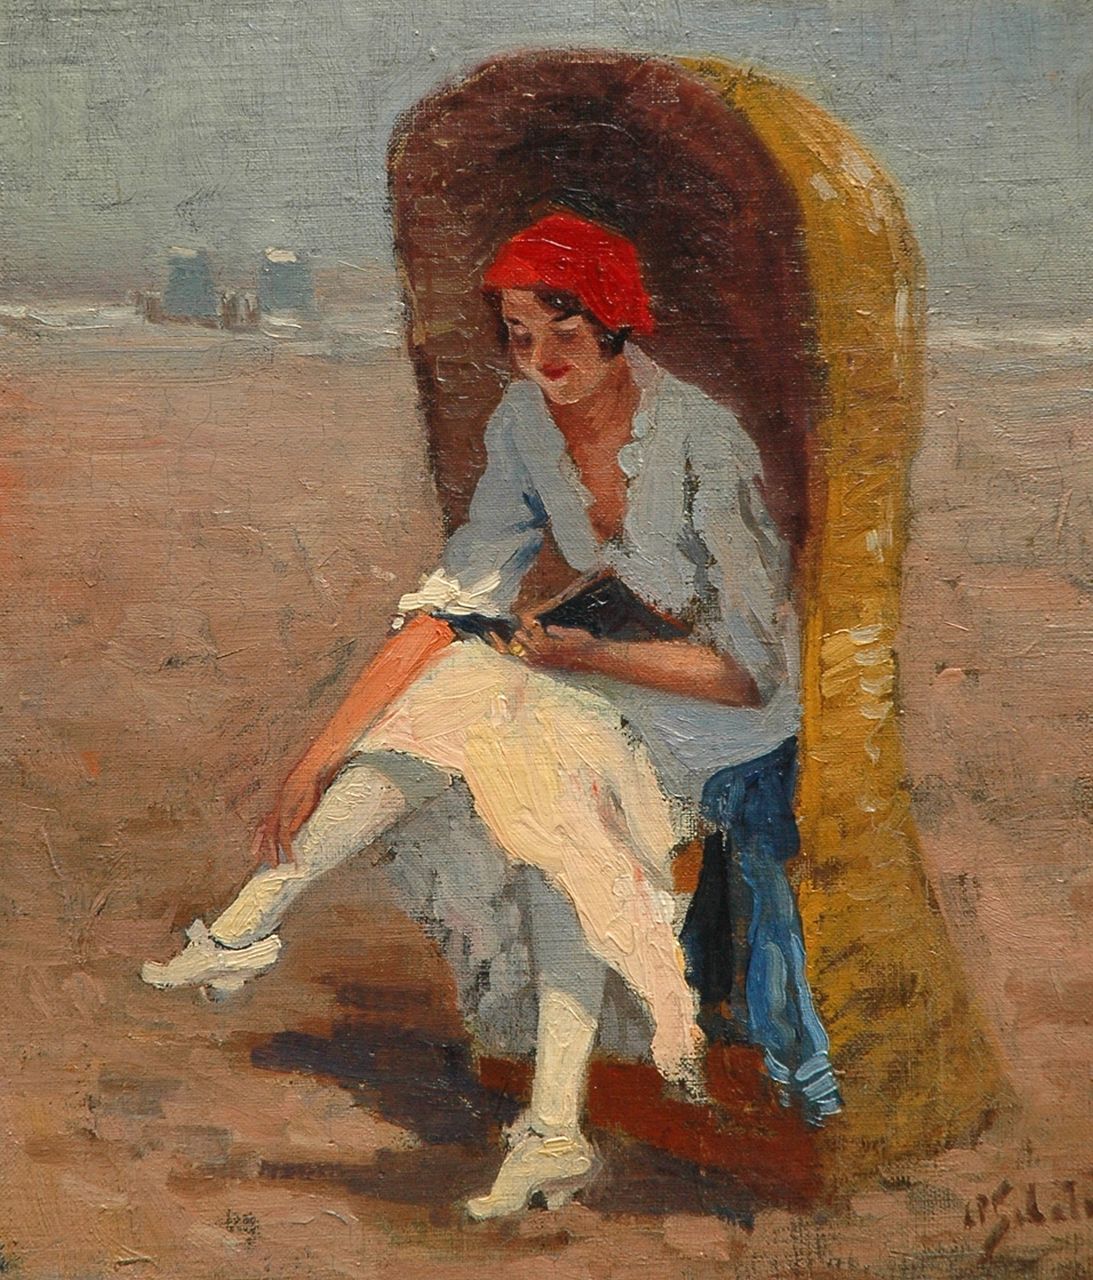 Schotel A.P.  | Anthonie Pieter Schotel, Reading on the beach, oil on canvas laid down on board 36.6 x 31.2 cm, signed l.r.